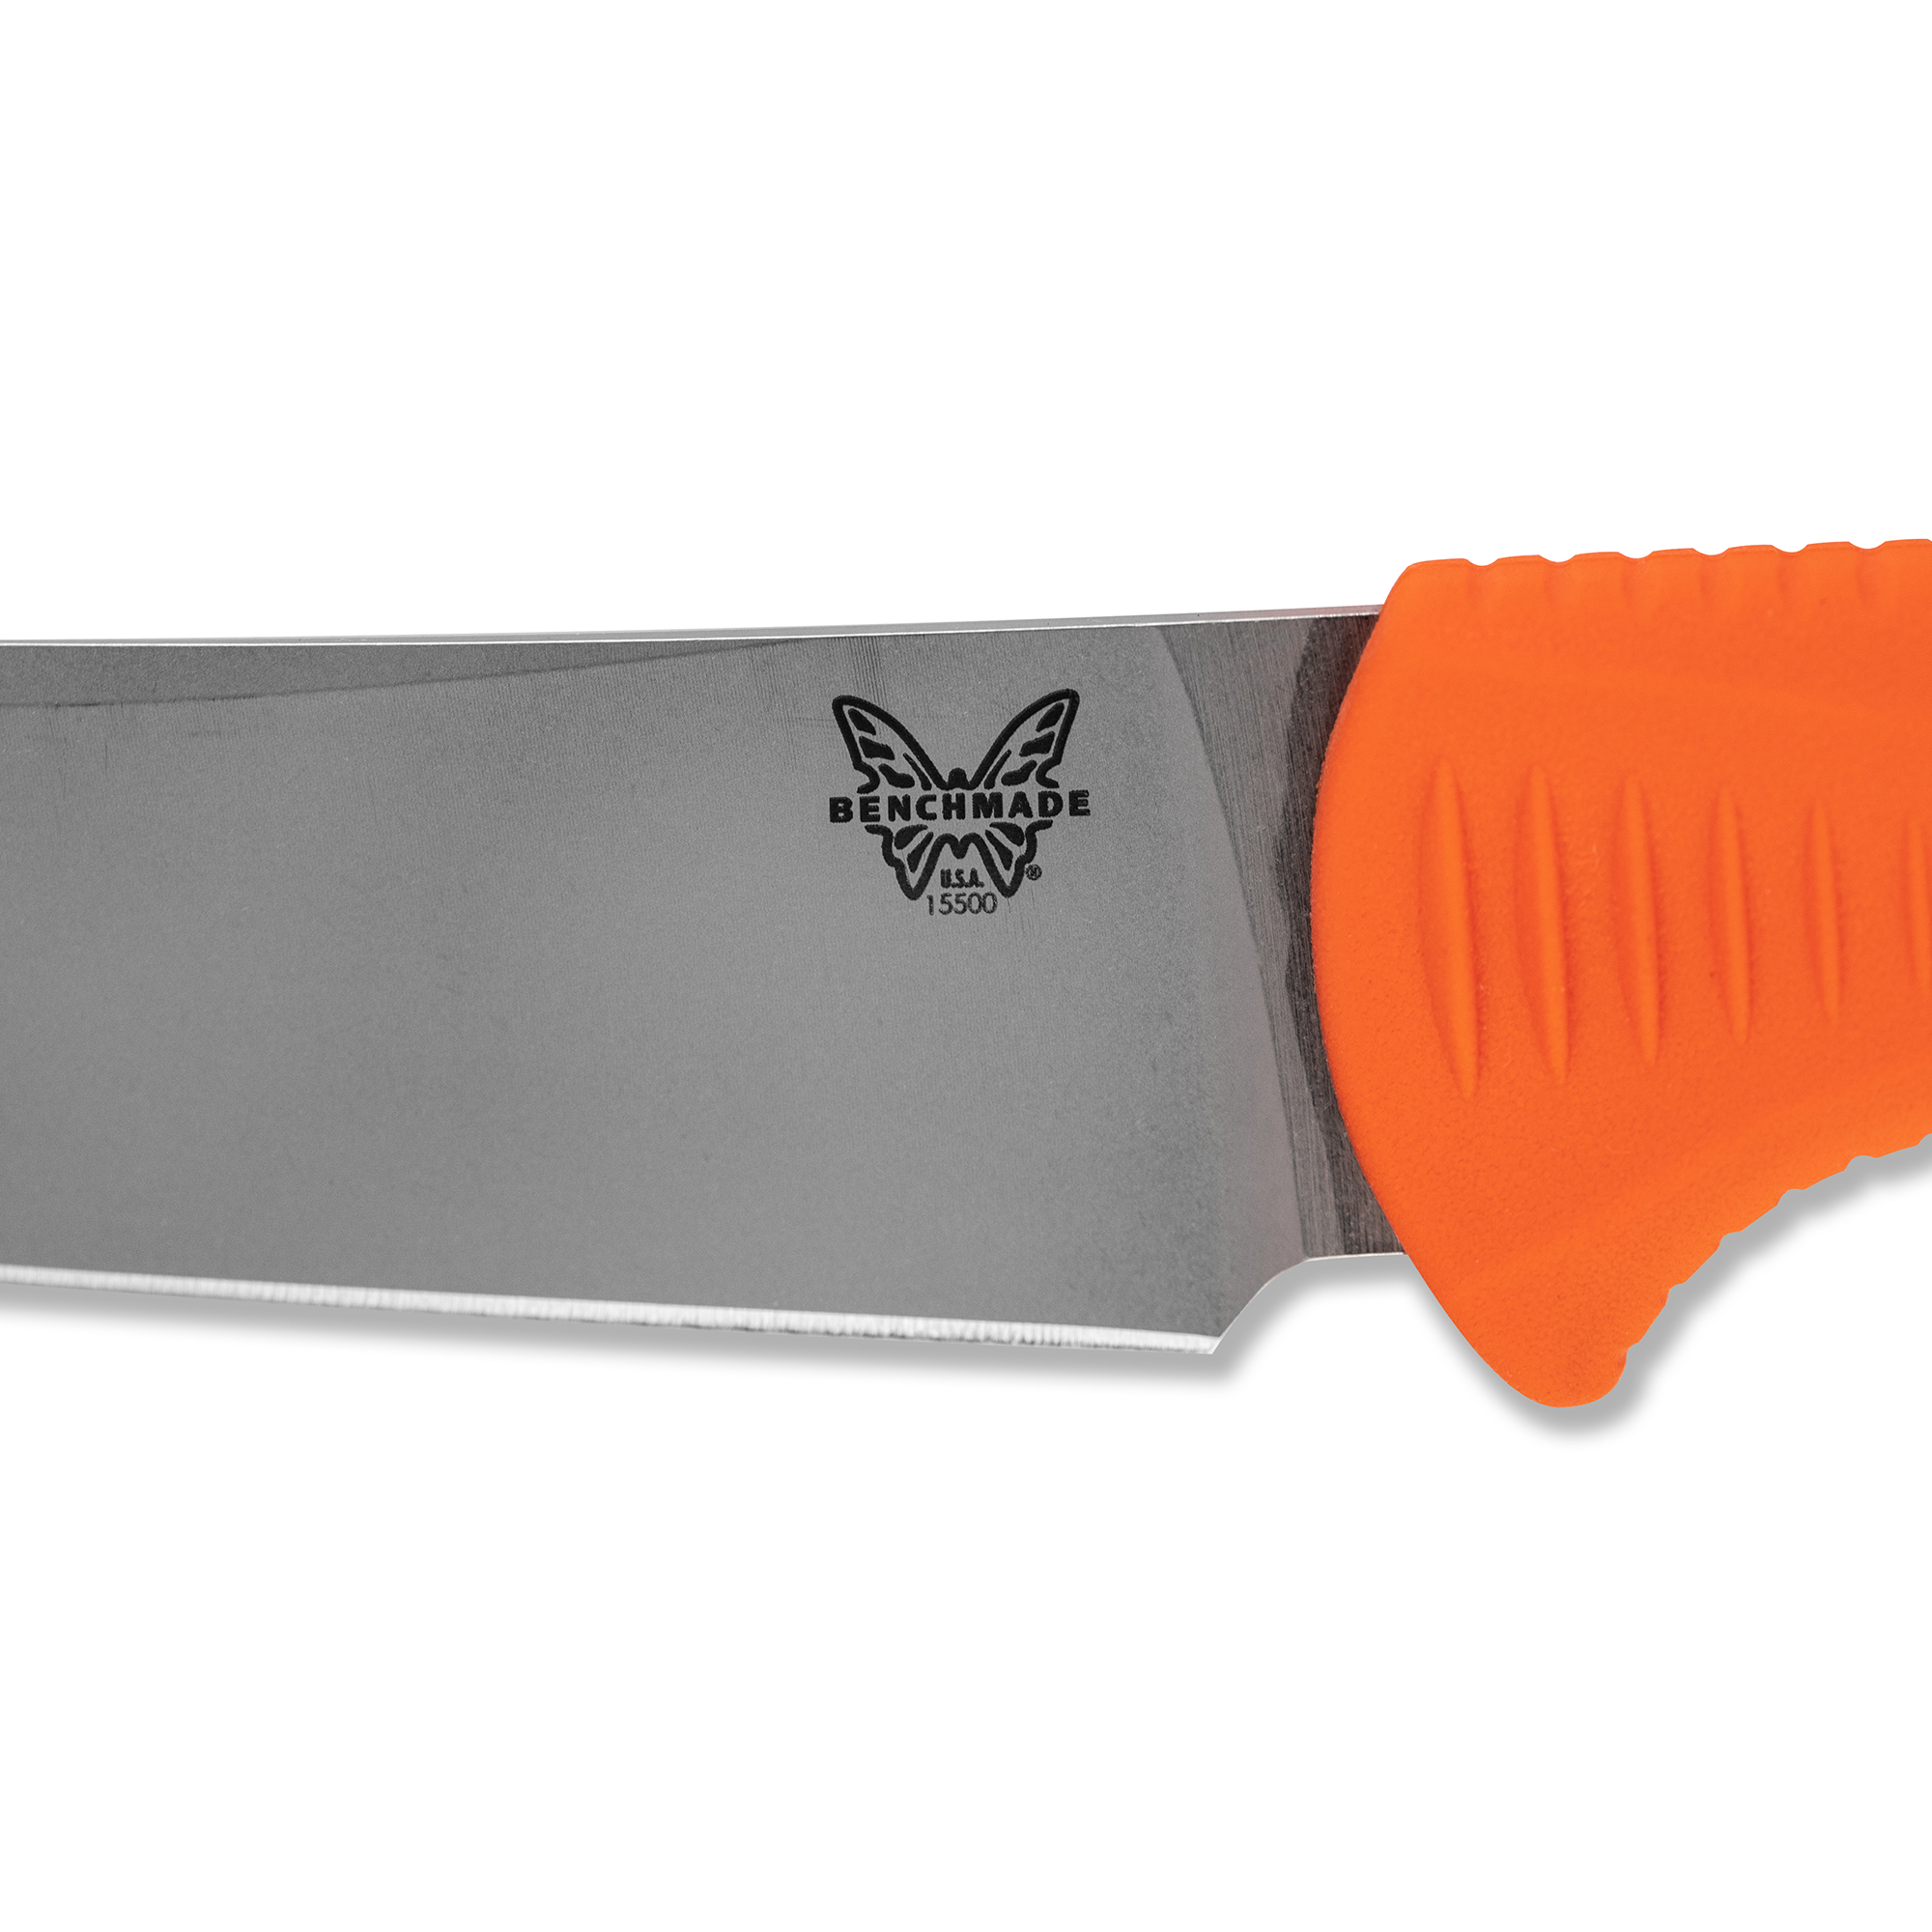 https://store.themeateater.com/on/demandware.static/-/Sites-meateater-master/default/dw266a7c13/benchmade-essential-meatcrafter-knife/benchmade-essential-meatcrafter-knife_global_blade.jpg